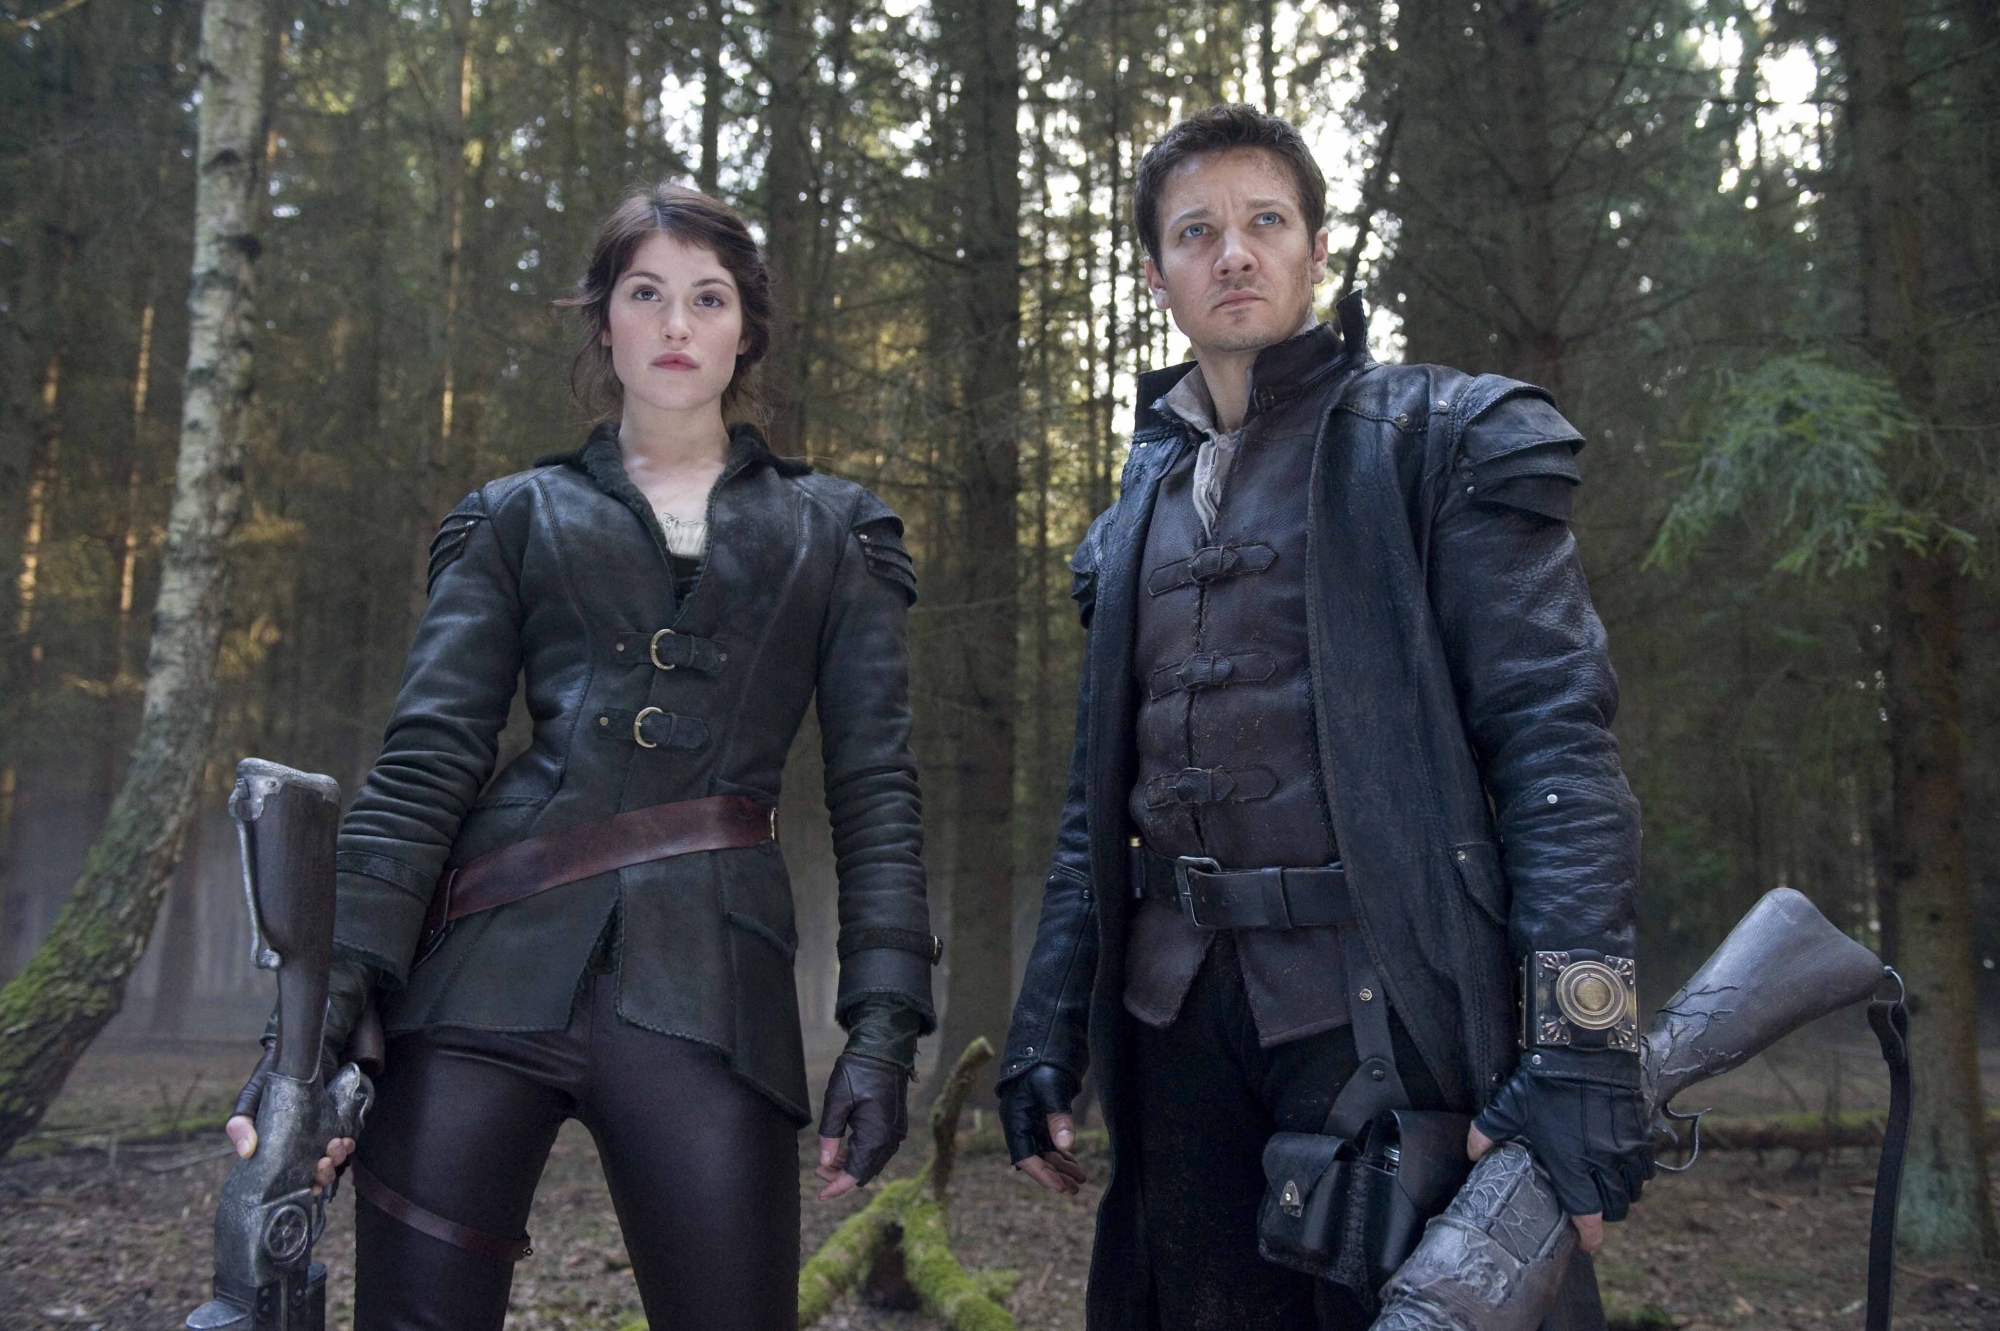 Gemma-Arterton-and-Jeremy-Renner-in-Hansel-and-Gretel-Witch-Hunters